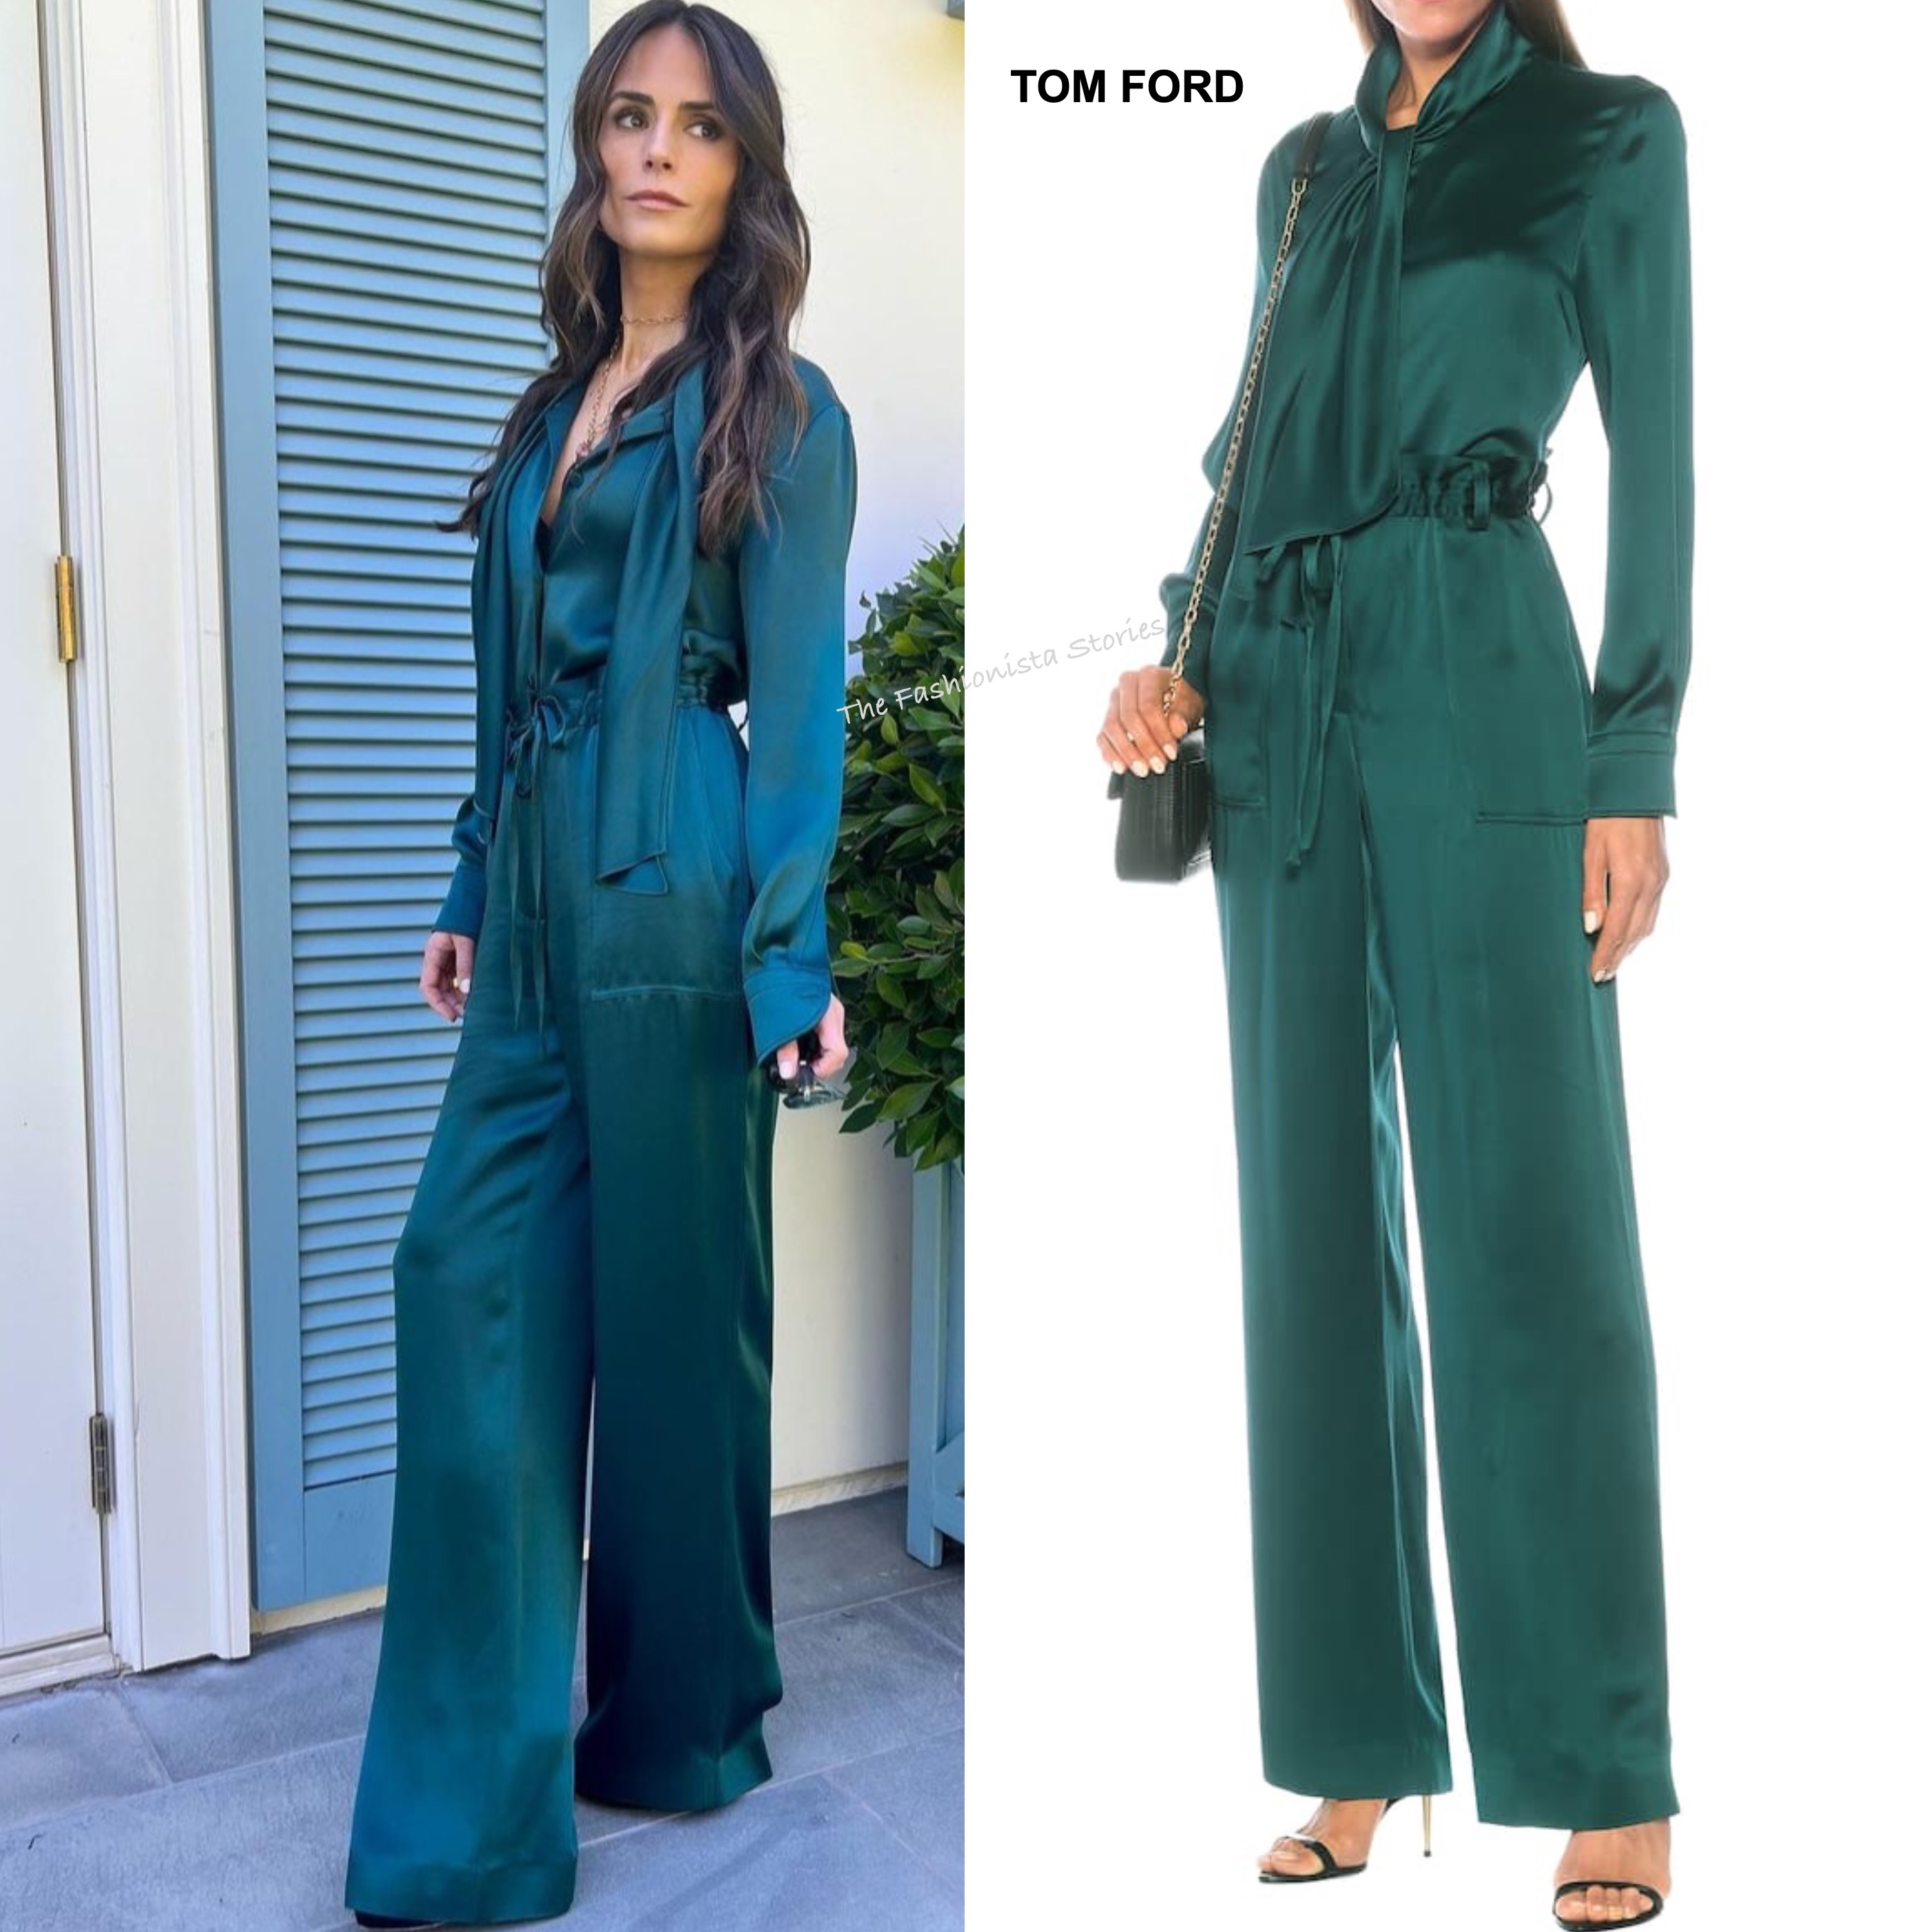 Instagram Style: Jordana Brewster in Tom Ford to Promote ''Fast X